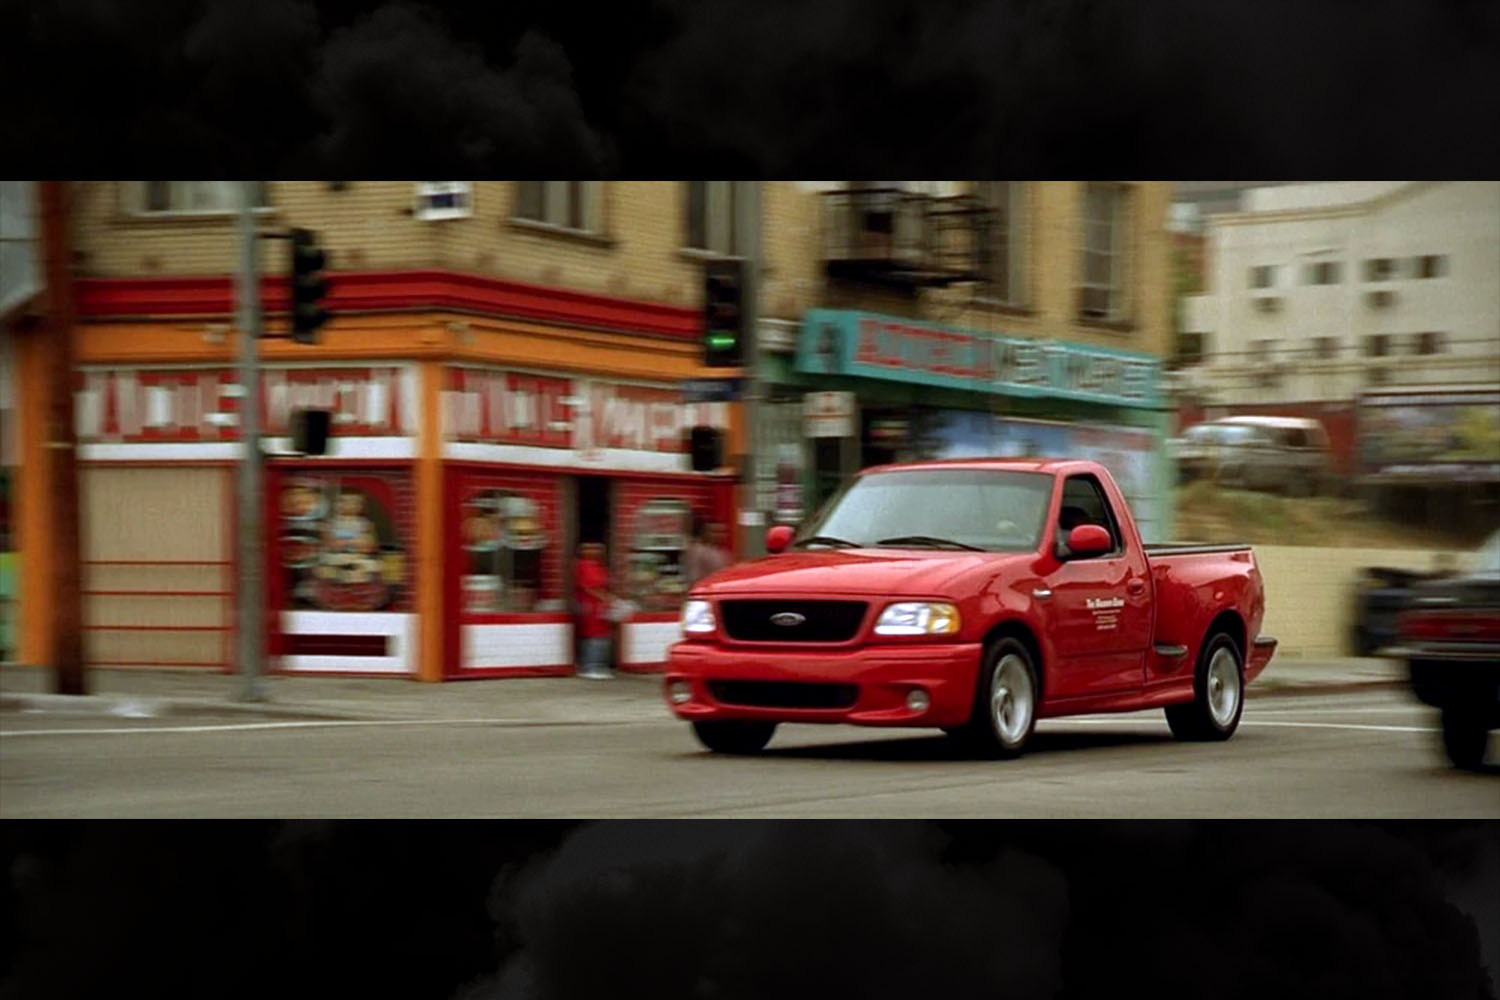 A red Ford F-150 SVT Lightning pickup truck in a scene from the original Fast and Furious movie